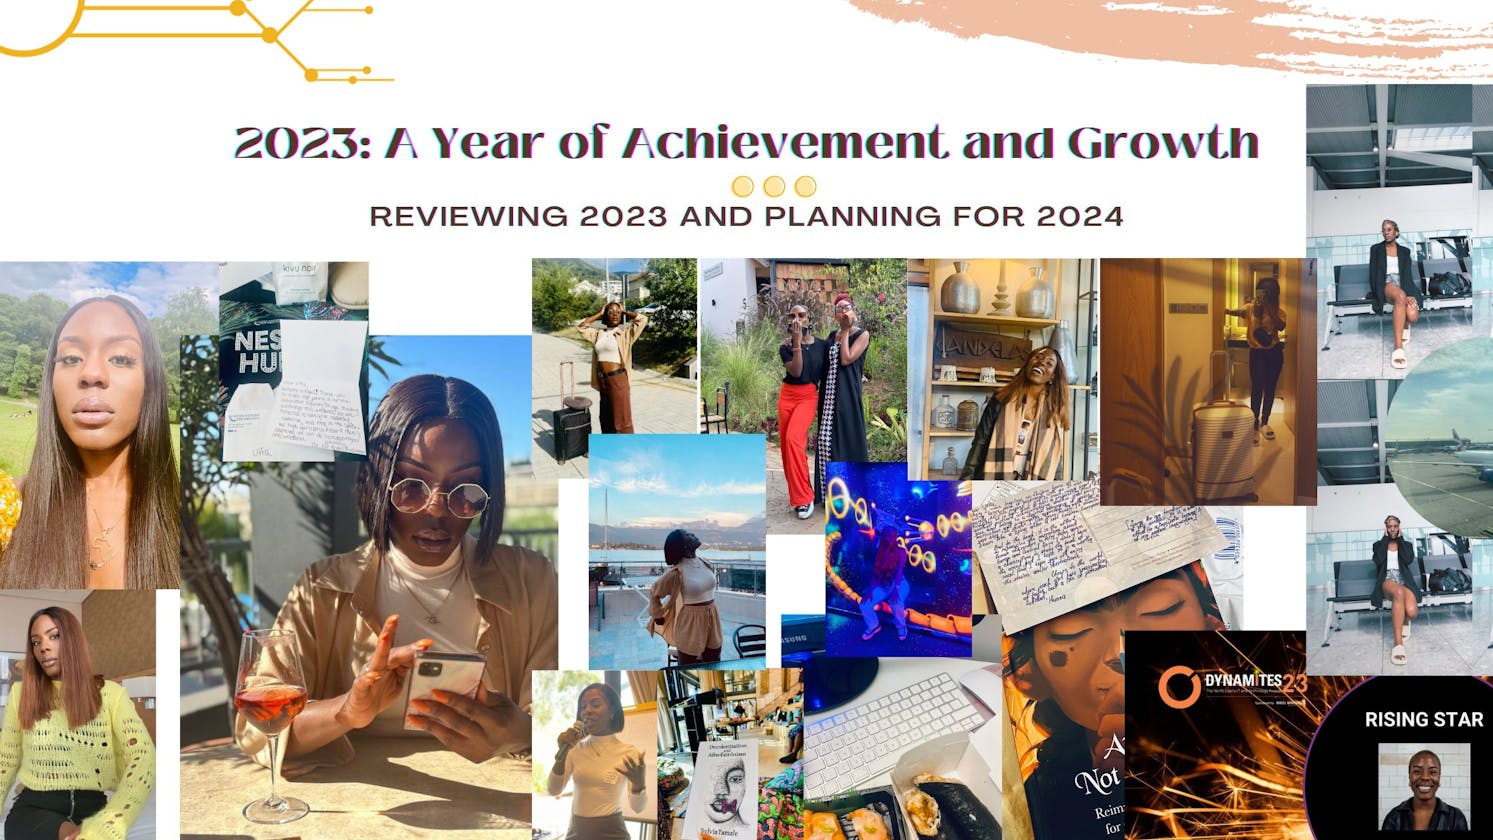 2023: A Year of Achievement and Growth